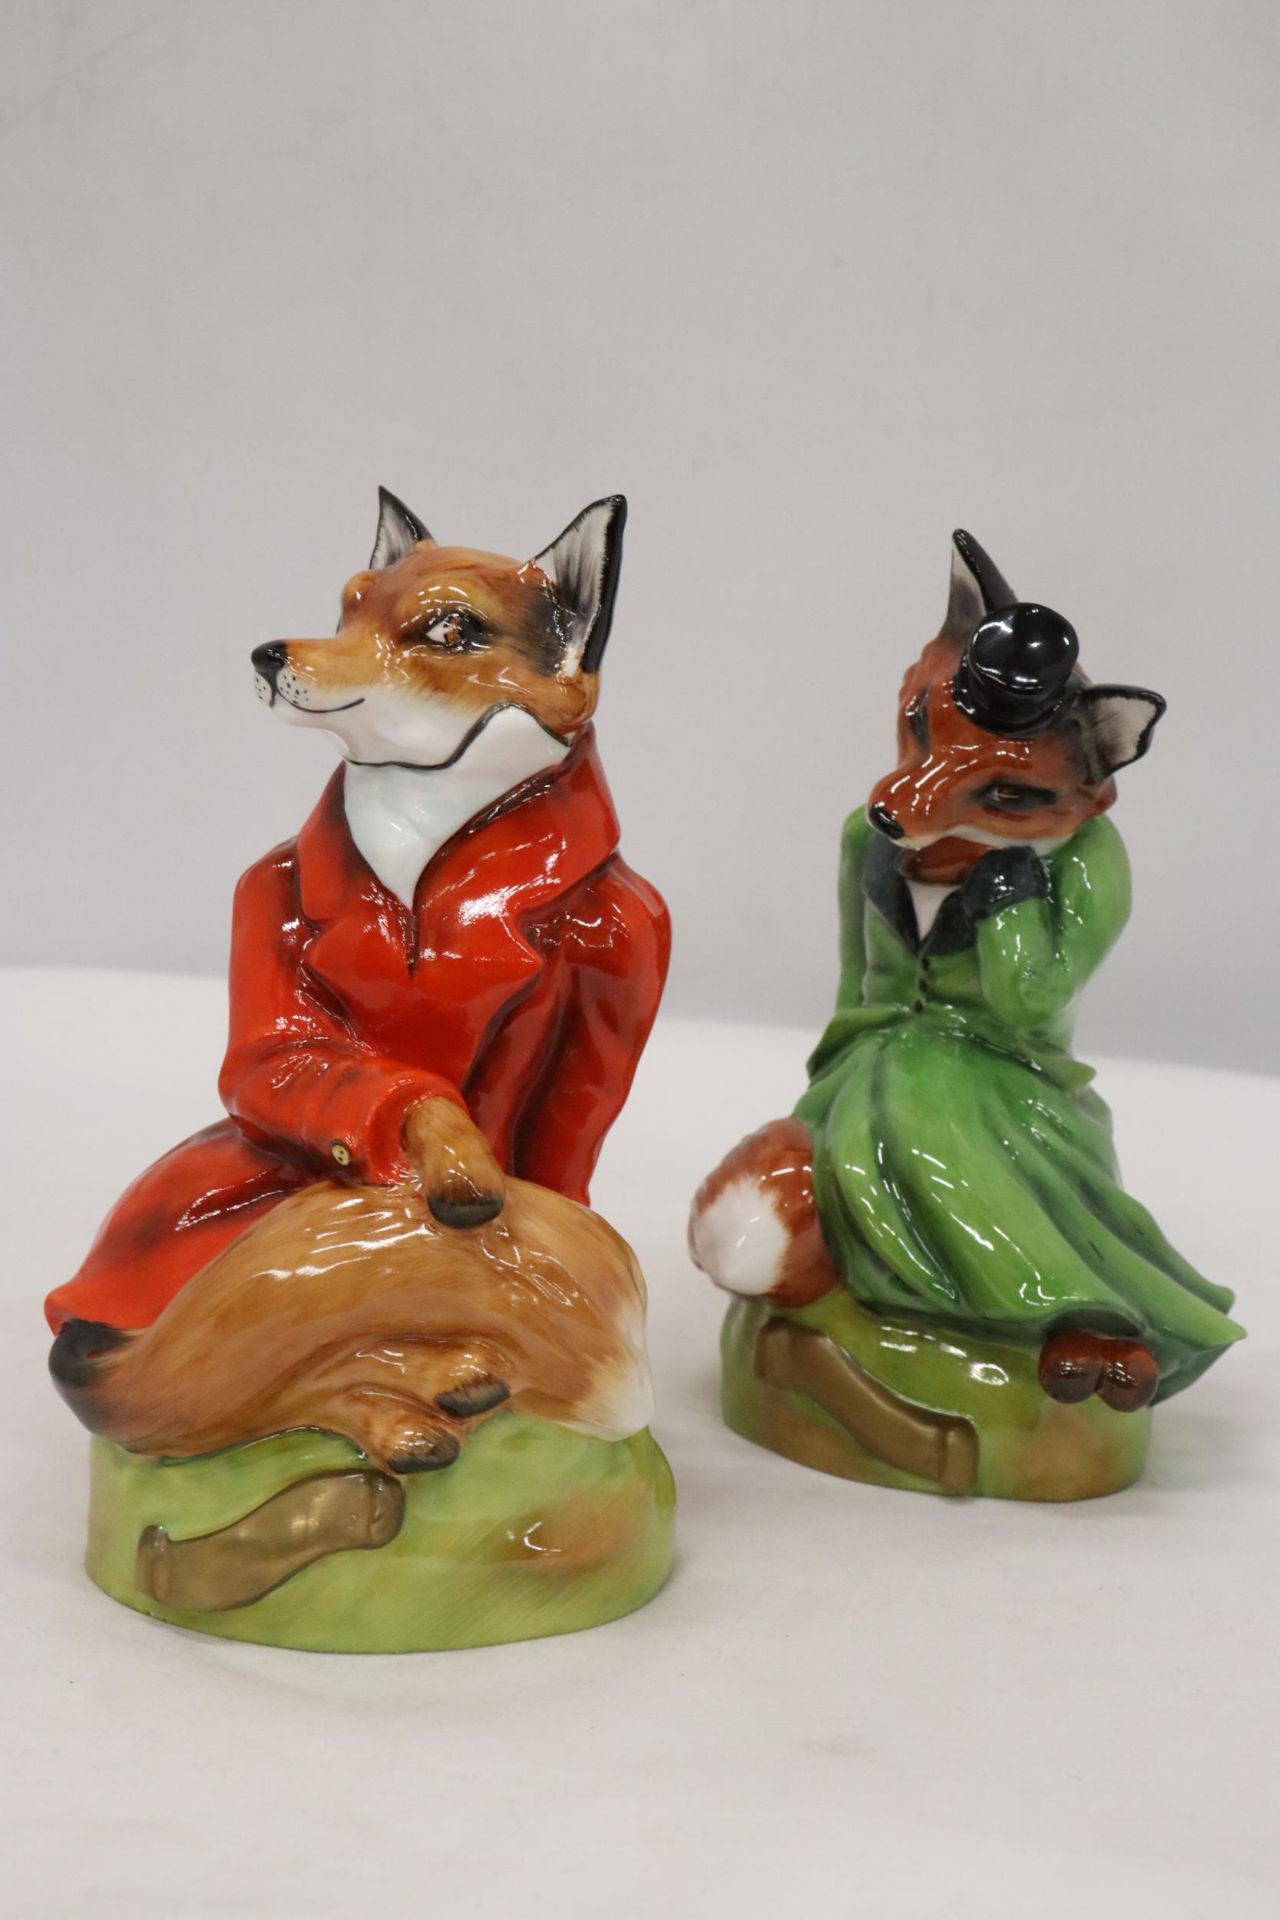 TWO LIMITED EDITION ROYALE STRATFORD FOX FIGURES